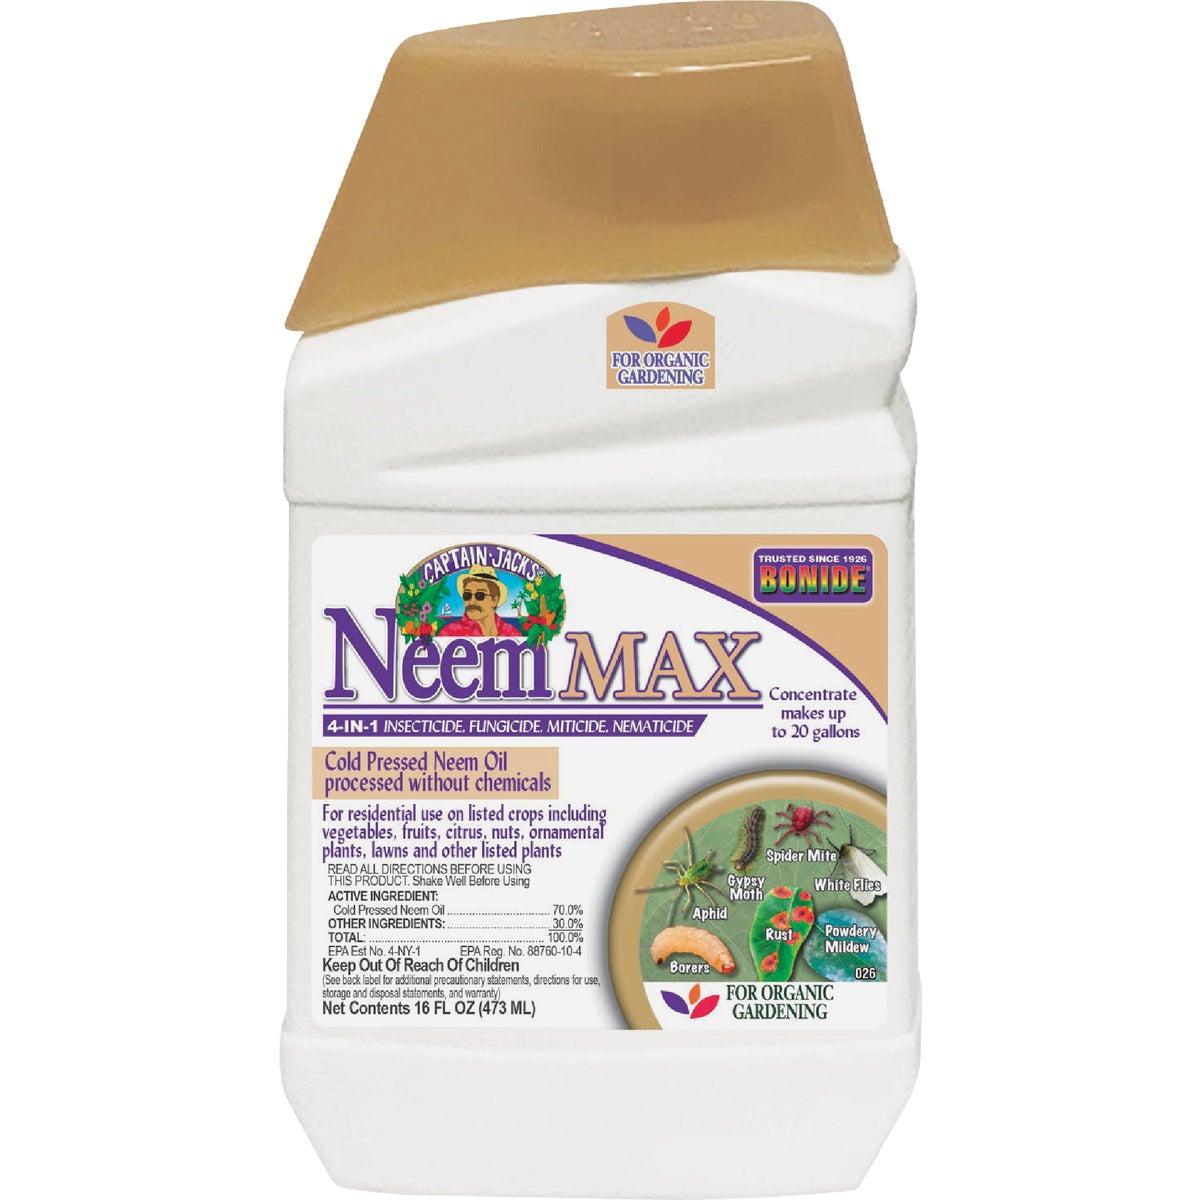 Item 700194, Protect your lawn and garden with Neem Max from Captain Jack's.